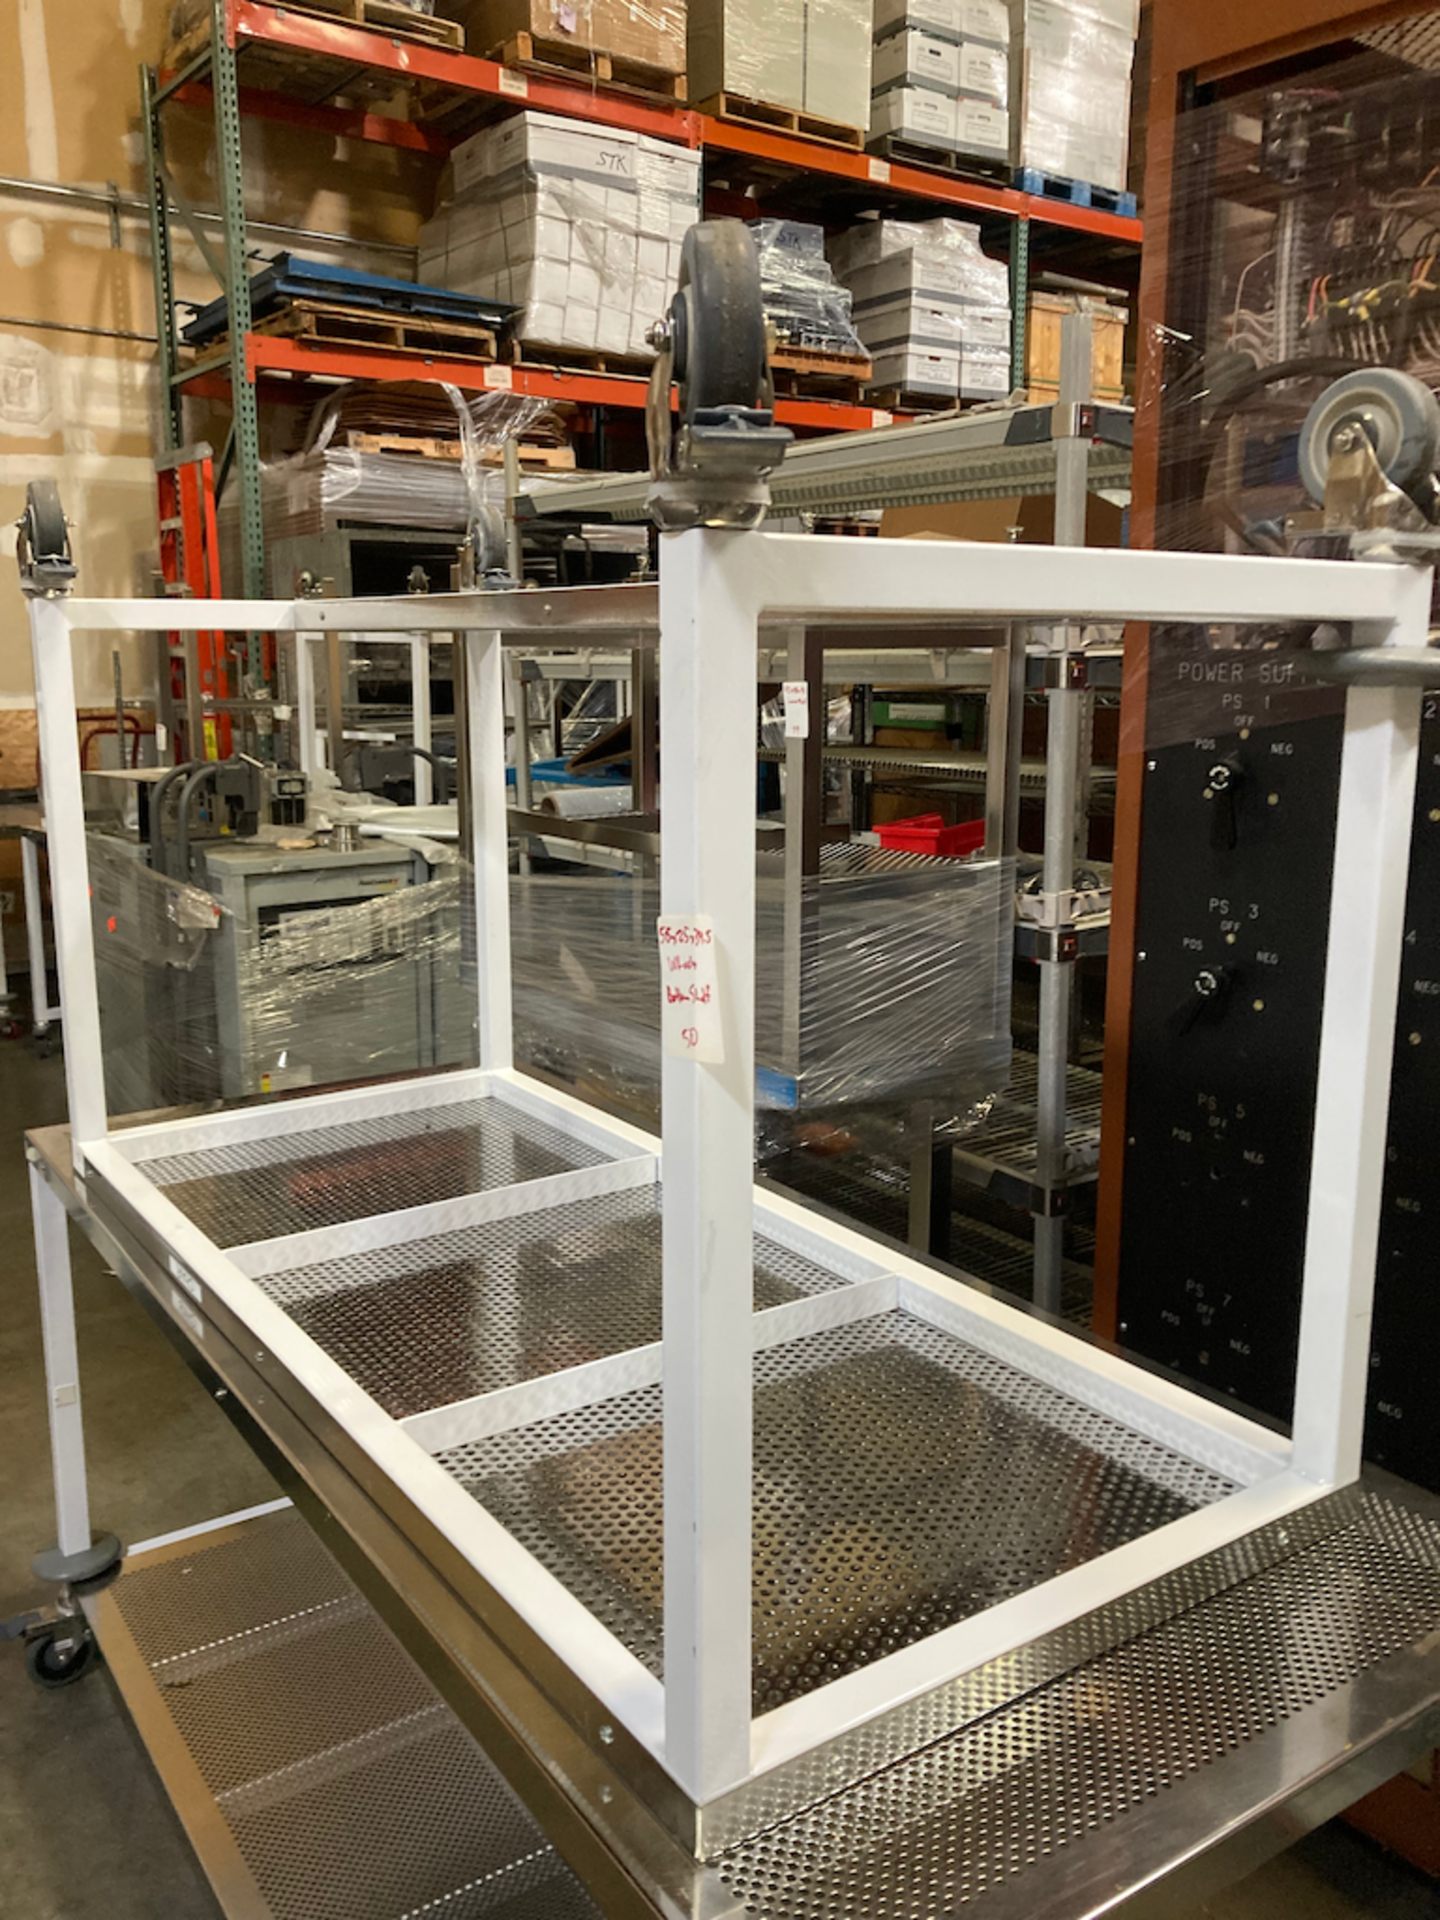 58 x 25 x 34.5 Perforated Stainless Steel Cleanroom Table Wheels, Bottom Shelf - Image 2 of 2